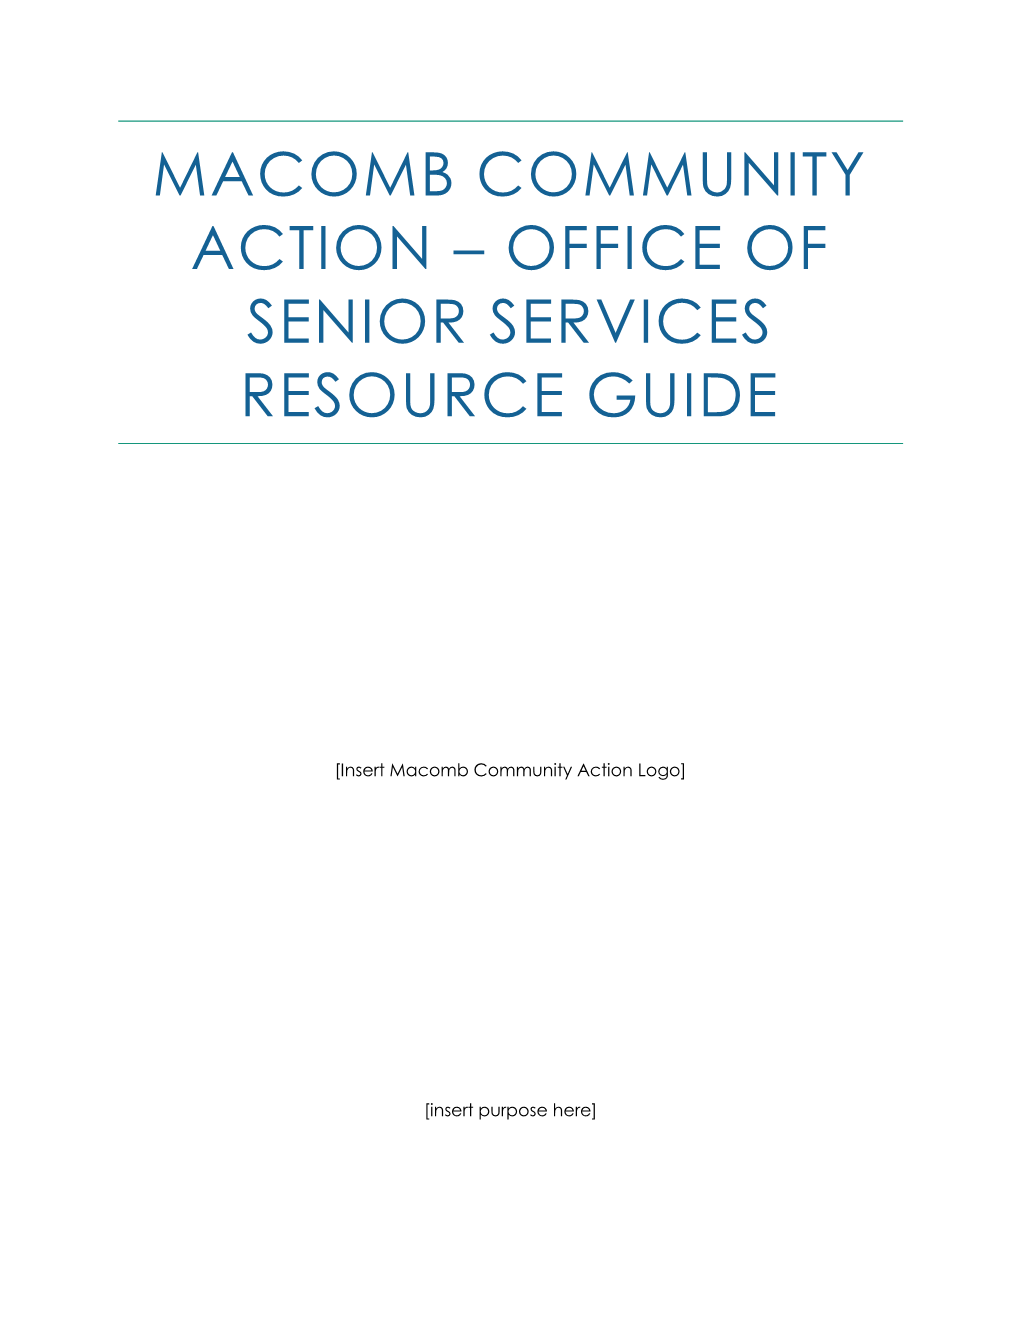 Macomb Community Action – Office of Senior Services Resource Guide